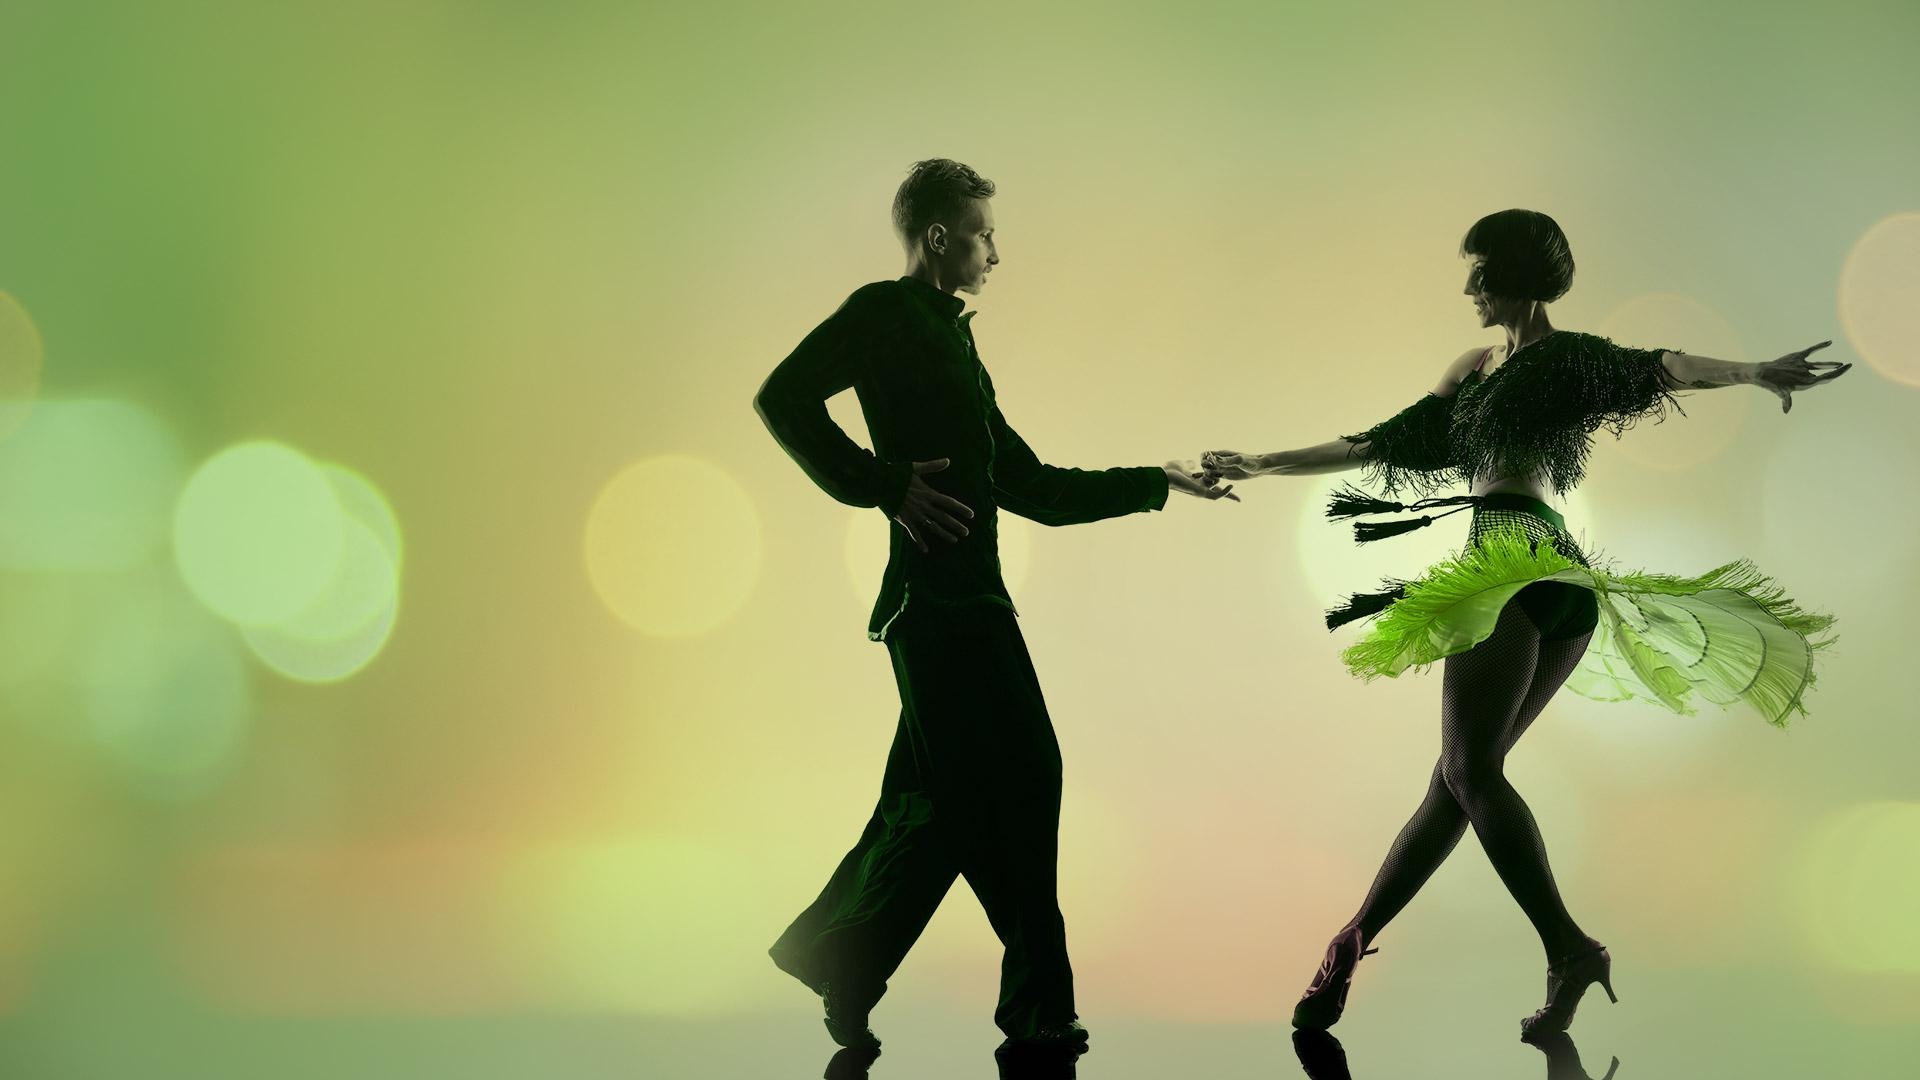 Salsa Dance: The two main styles of the dance - linear and circular, A dance of Afro-Caribbean origin. 1920x1080 Full HD Background.